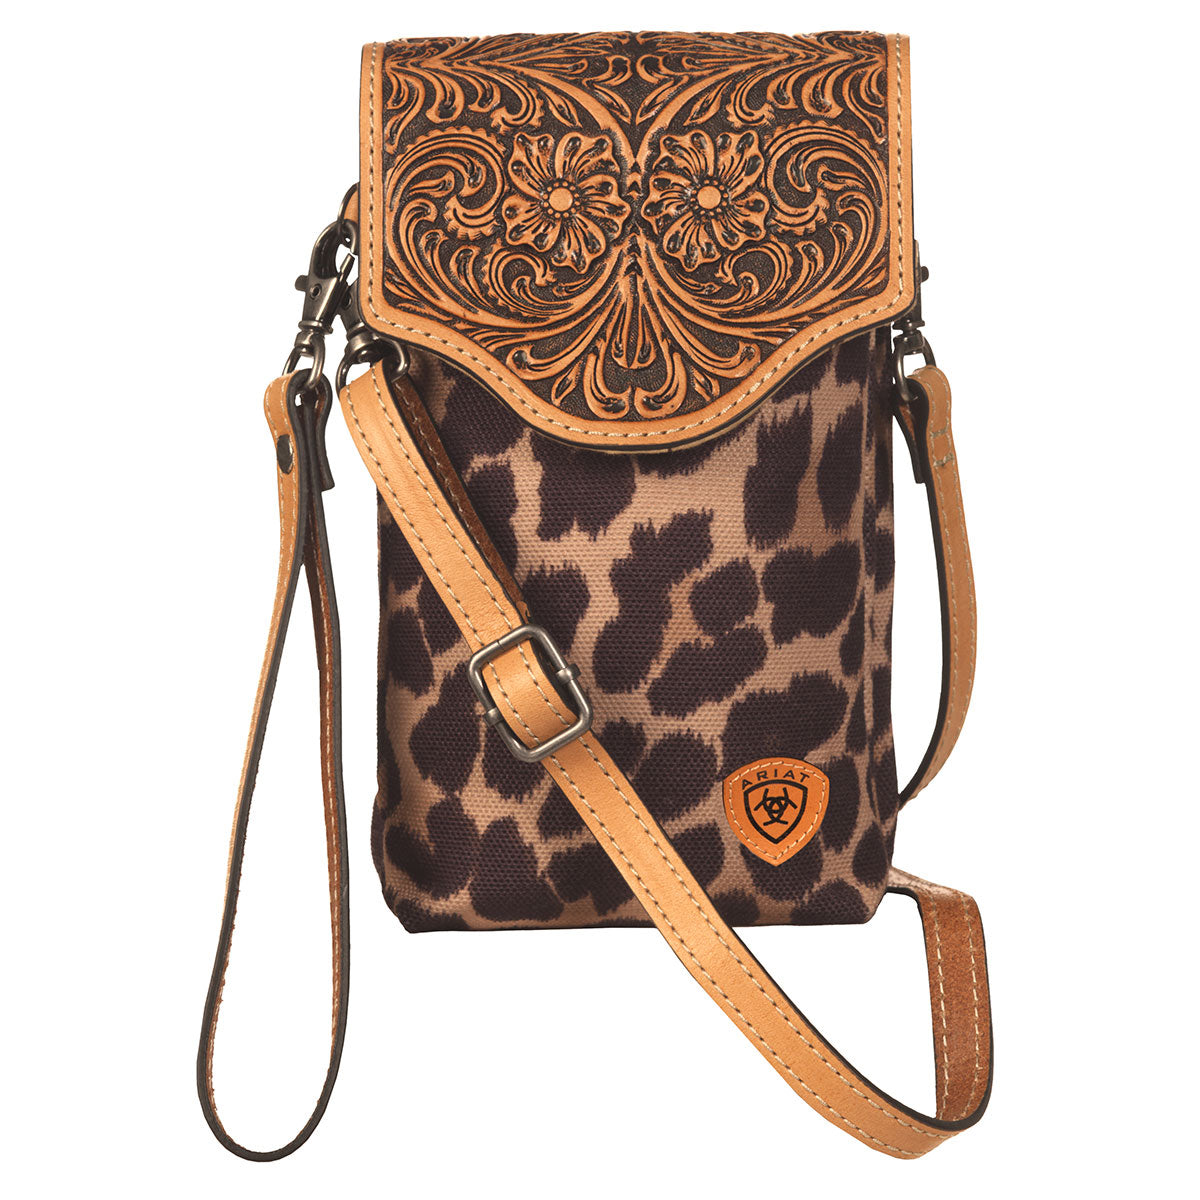 Ariat Tooled Leather and Leopard Canvas Messenger Bag